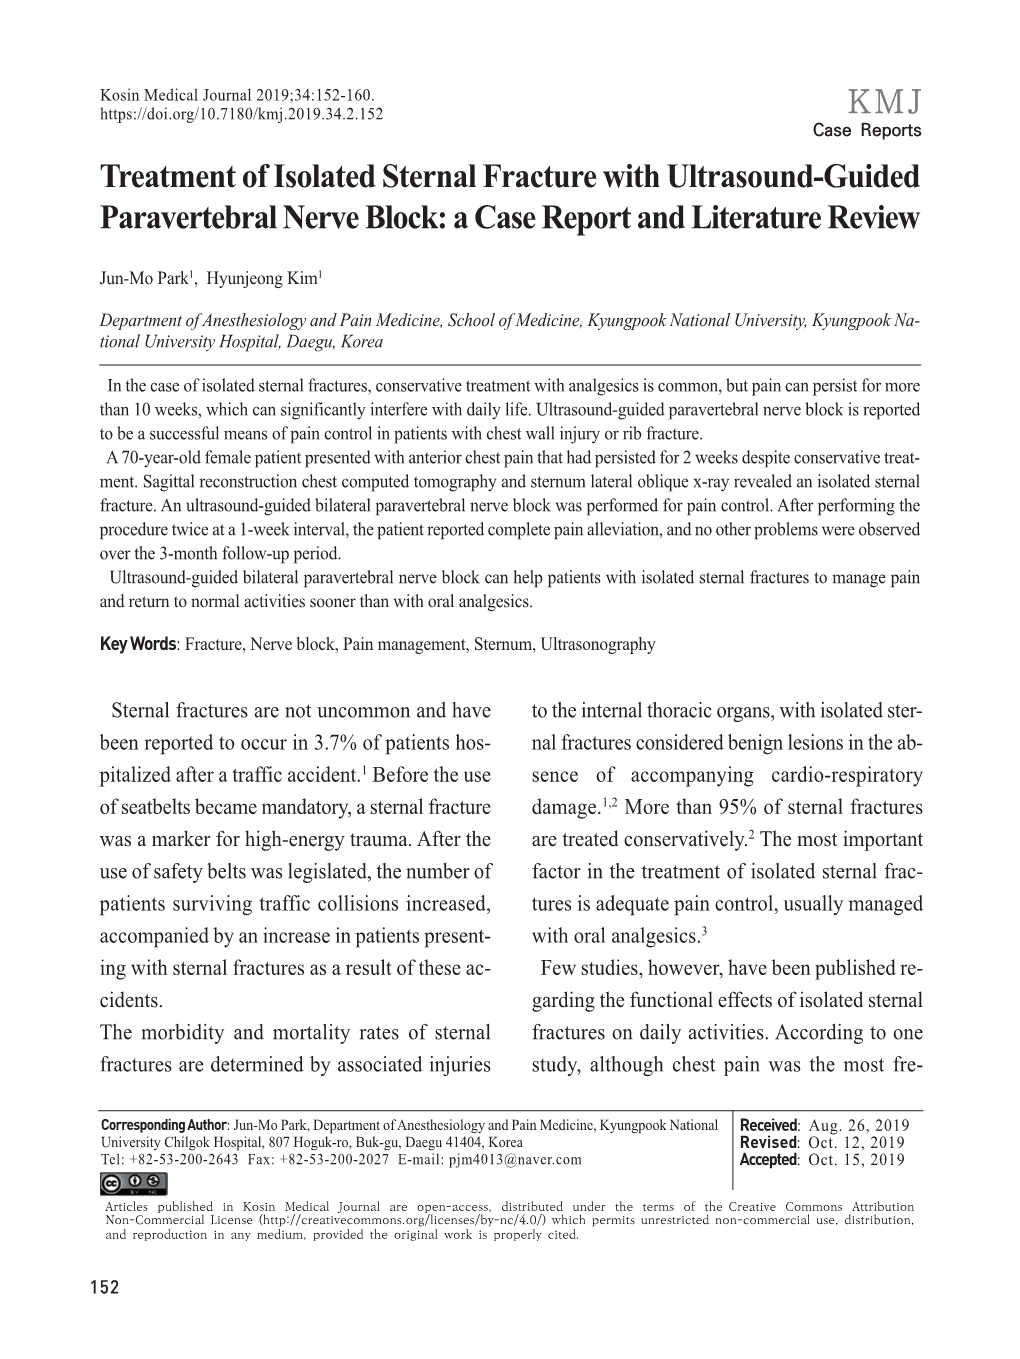 Treatment of Isolated Sternal Fracture with Ultrasound-Guided Paravertebral Nerve Block: a Case Report and Literature Review